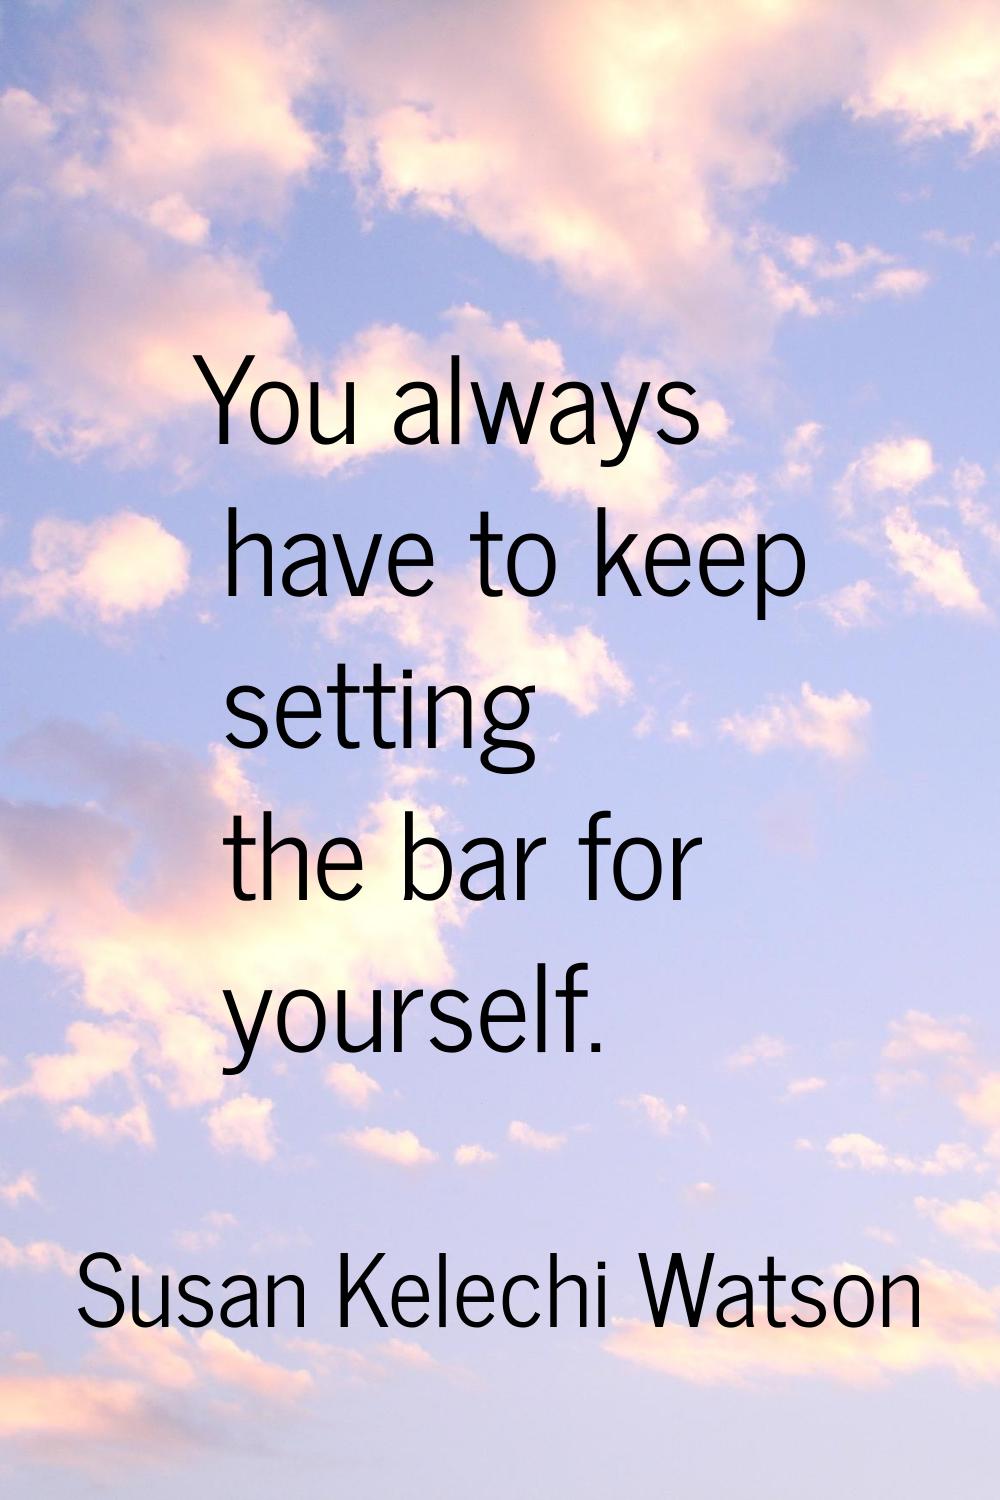 You always have to keep setting the bar for yourself.